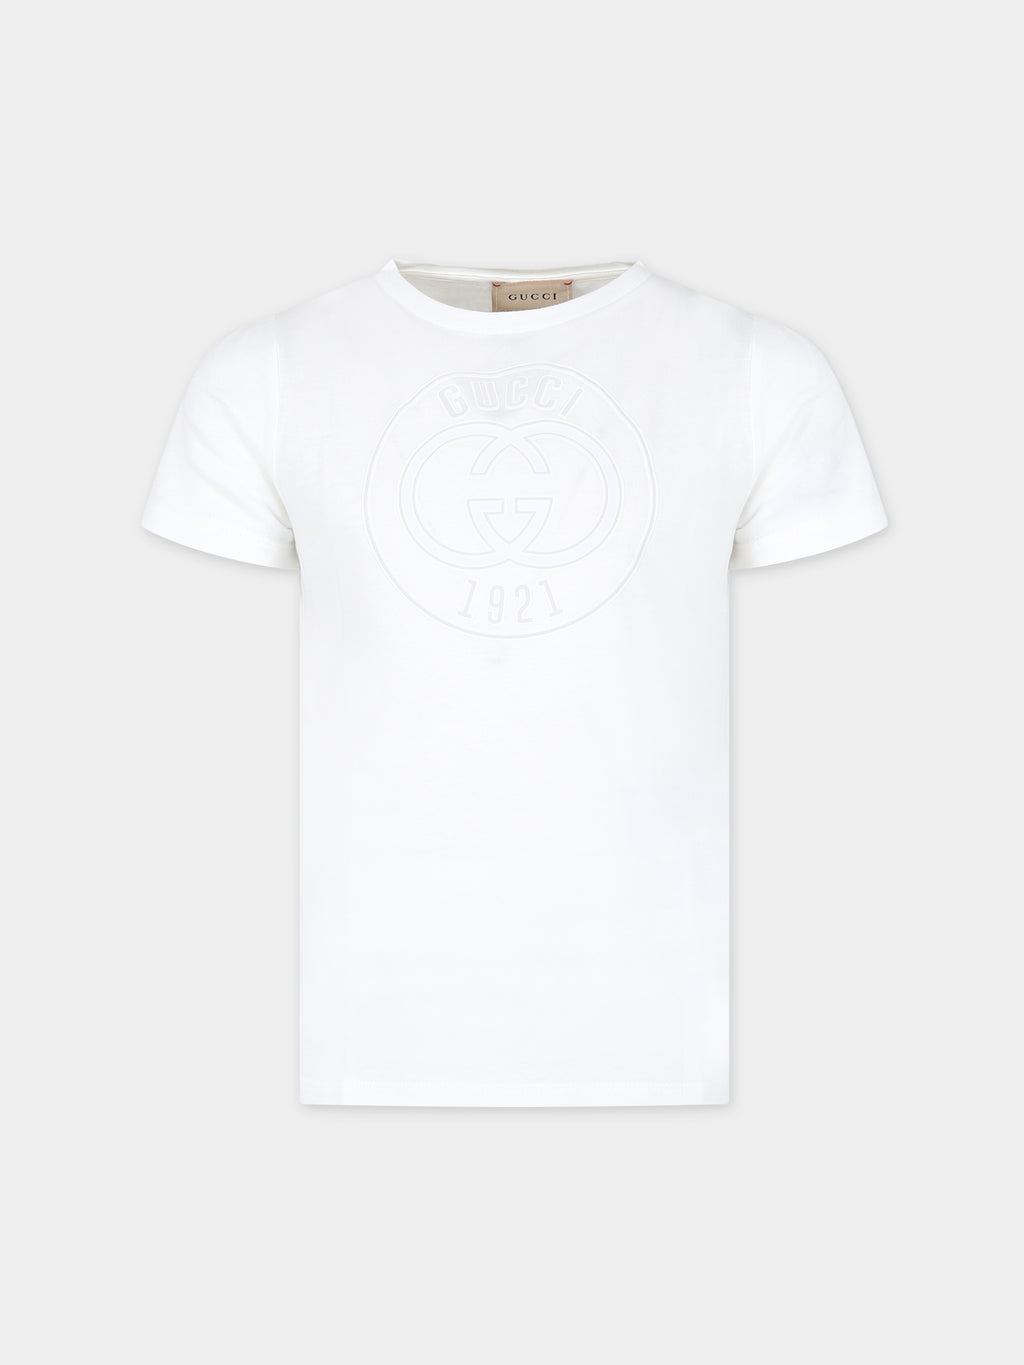 White t-shirt for kids with logo Gucci 1921